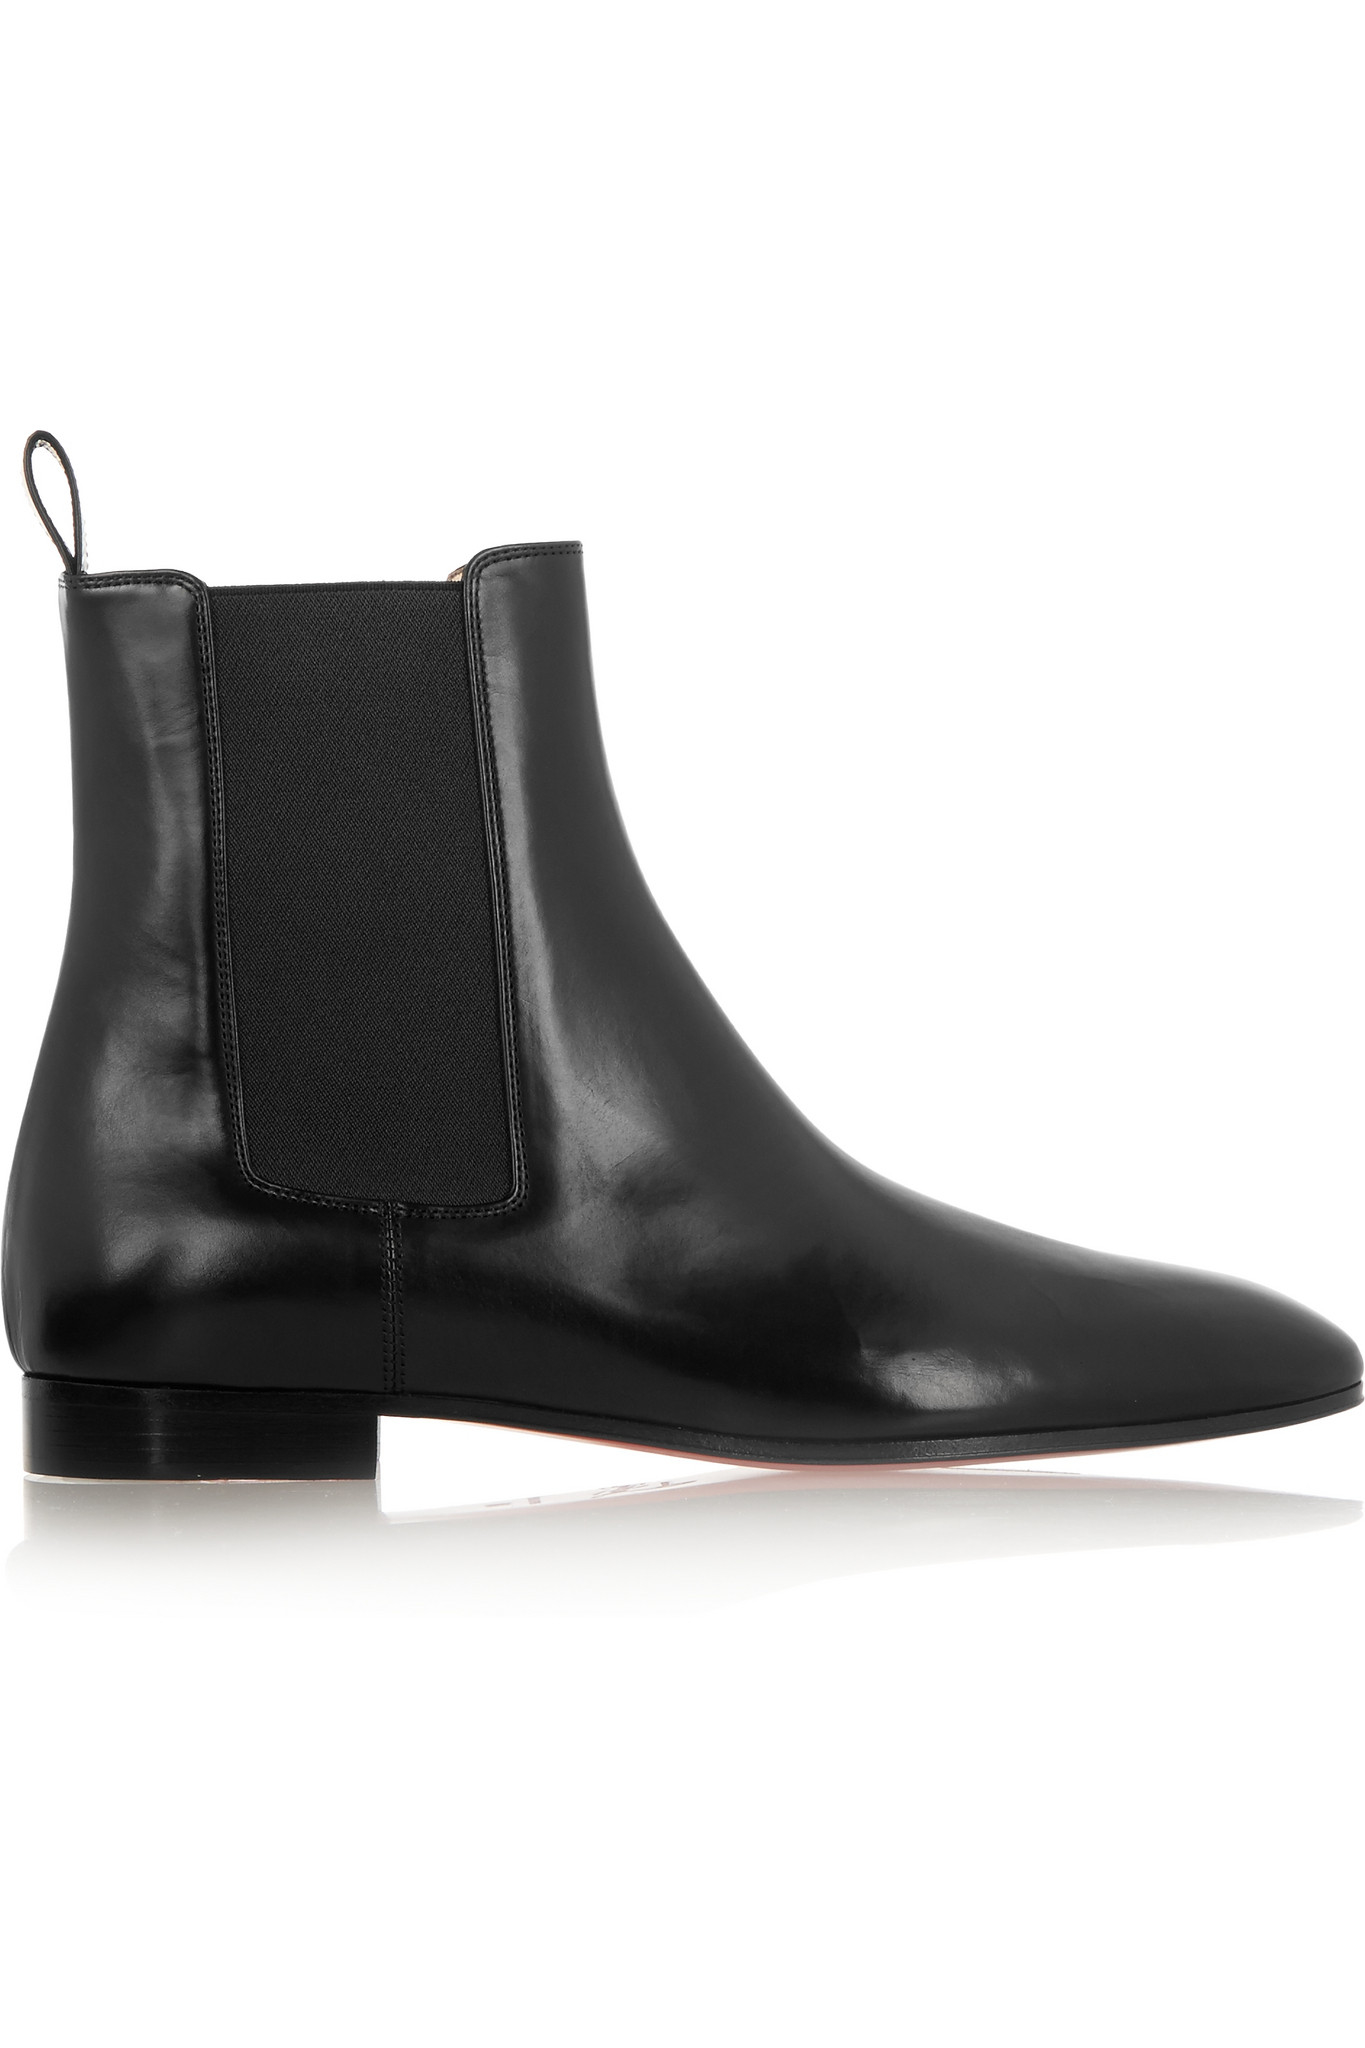 Christian louboutin Masterboot Leather Ankle Boots in Black | Lyst